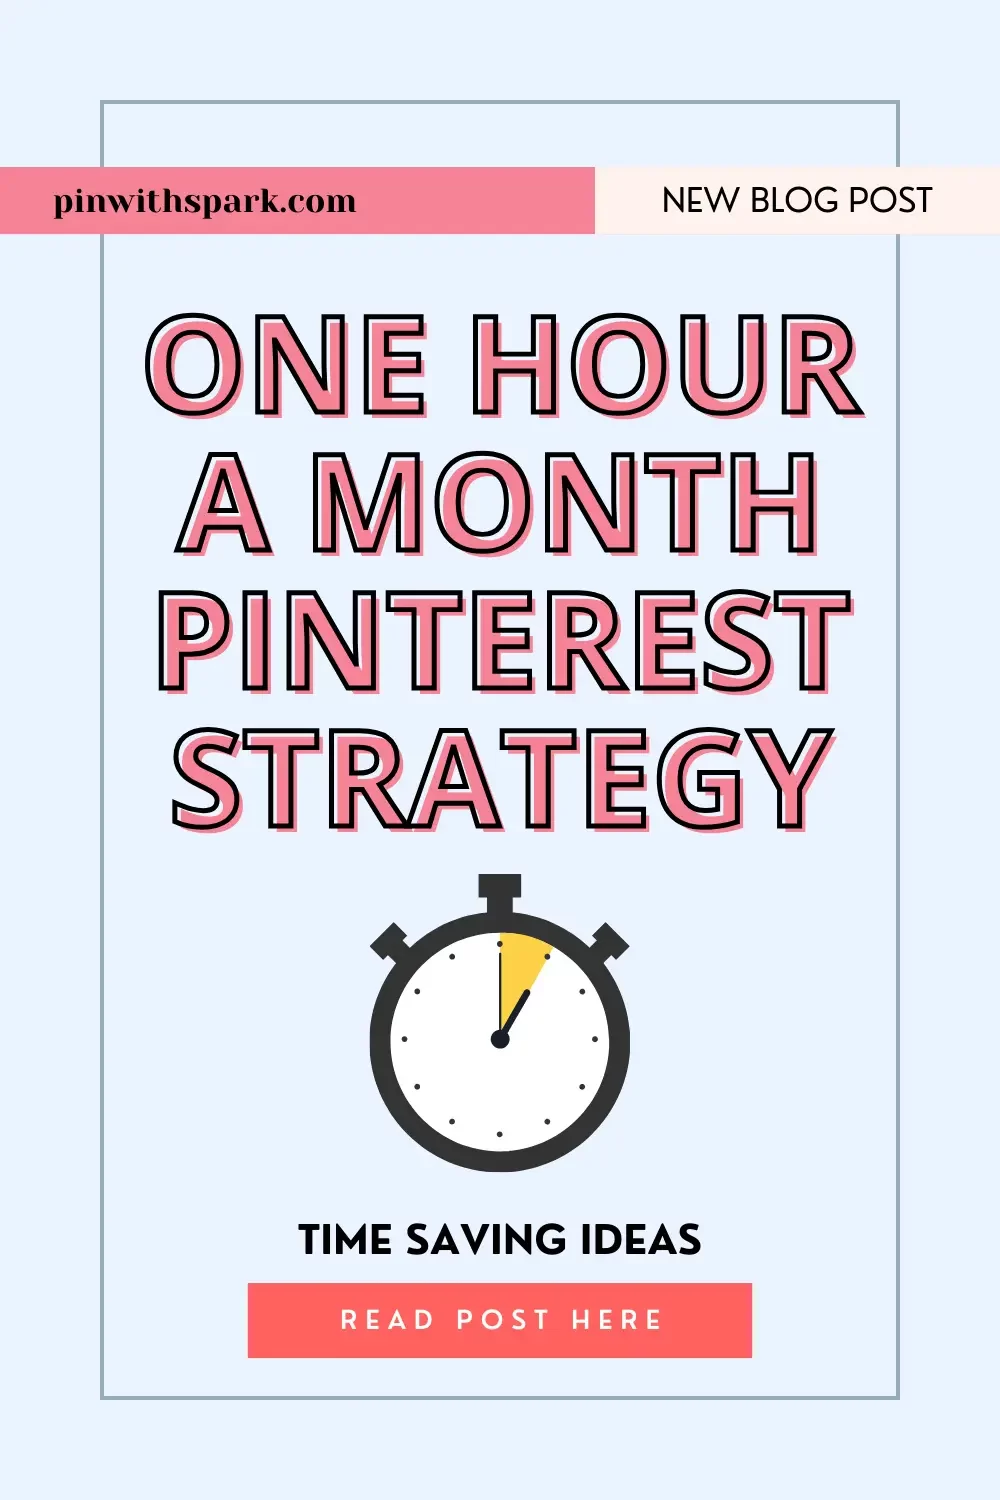 one hour a month pinterest strategy with one hour clock image pinwithspark.com